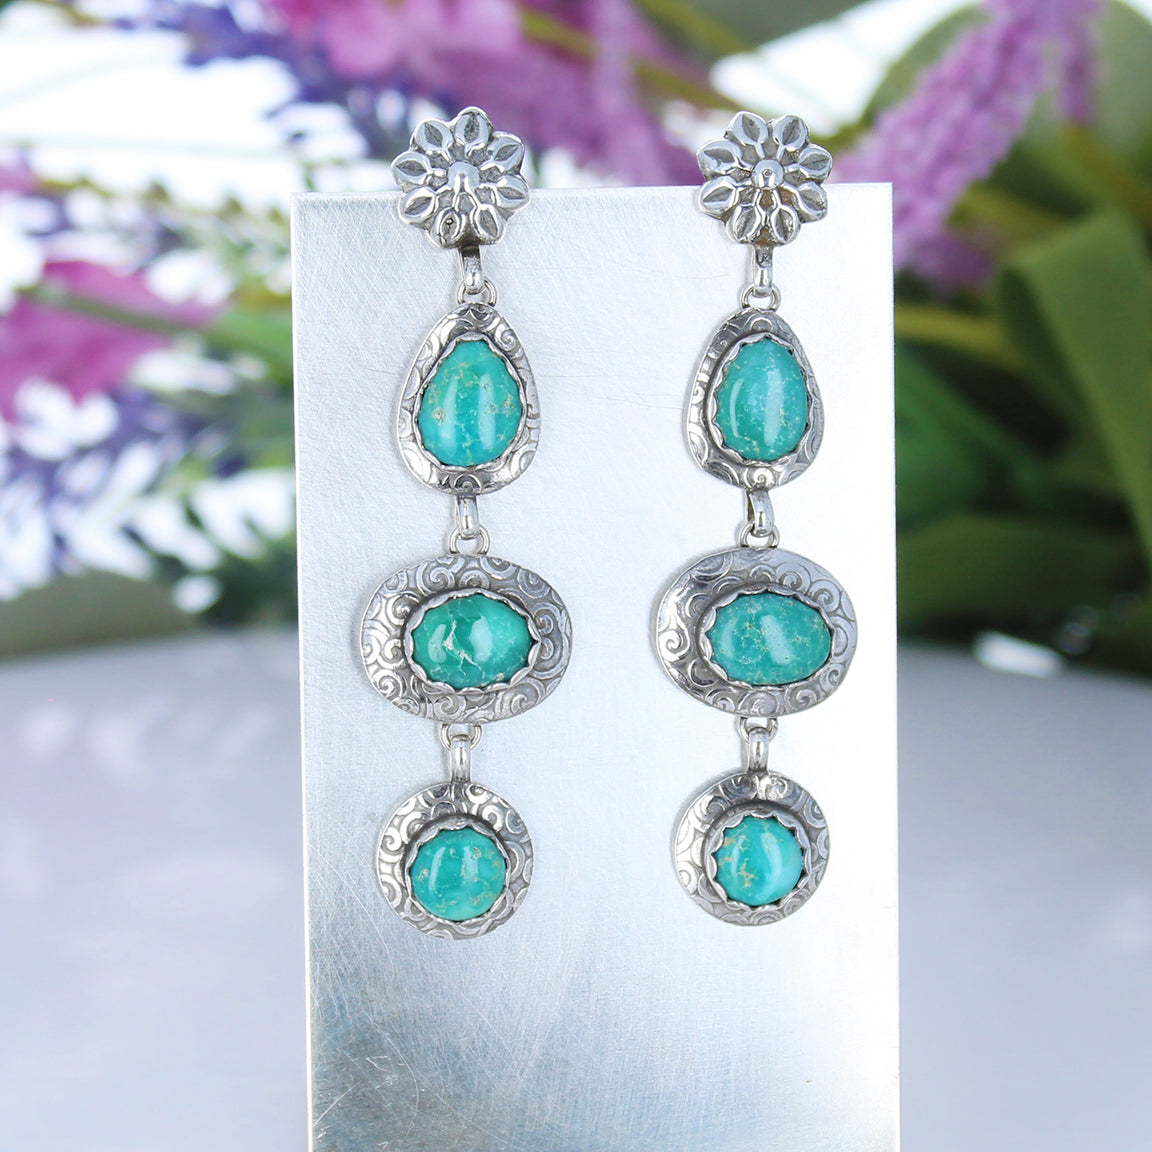 Emerald Valley Turquoise Earrings 3 Stone Spiral Design 3"